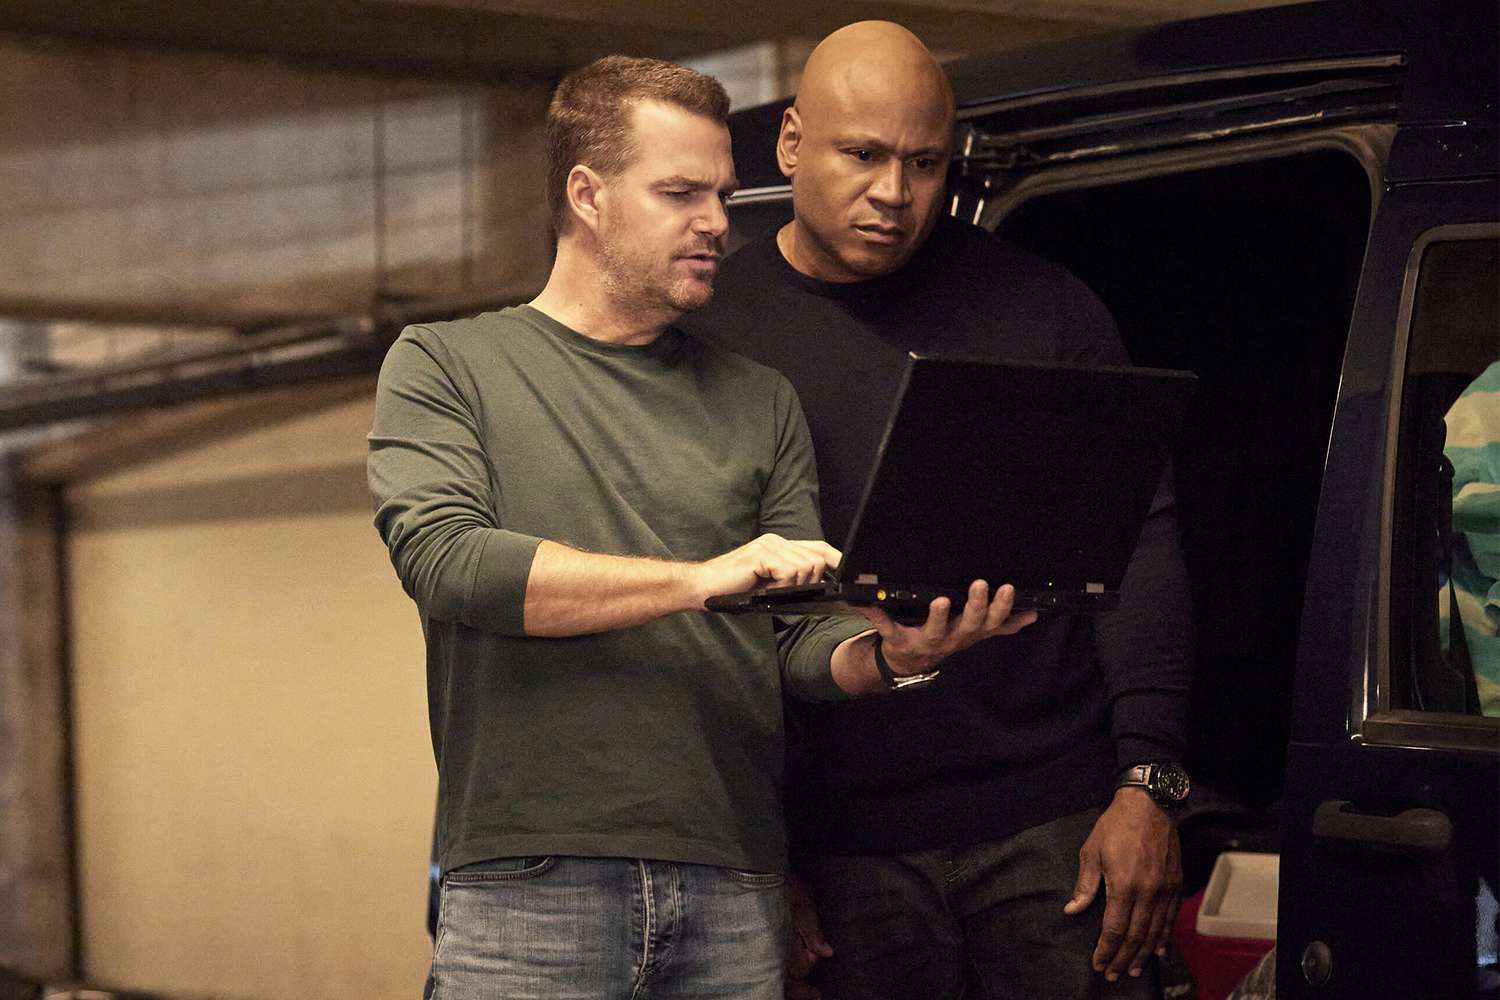 “Survival of the Fittest” – When a Marine falls ill during a training mission due to an attack by a genetic weapon, the NCIS must track down the person responsible for unleashing it. Also, Deeks struggles with balancing work and home life when Rosa comes down with the flu, on the CBS Original series NCIS: LOS ANGELES, Sunday, Nov. 20 (10:30-11:30 PM, ET/PT) on the CBS Television Network, and available to stream live and on demand on Paramount+* Pictured (L-R): Chris O'Donnell (Special Agent G. Callen) and LL COOL J (Special Agent Sam Hanna). Photo: Sara Mally/CBS ©2022 CBS Broadcasting, Inc. All Rights Reserved.